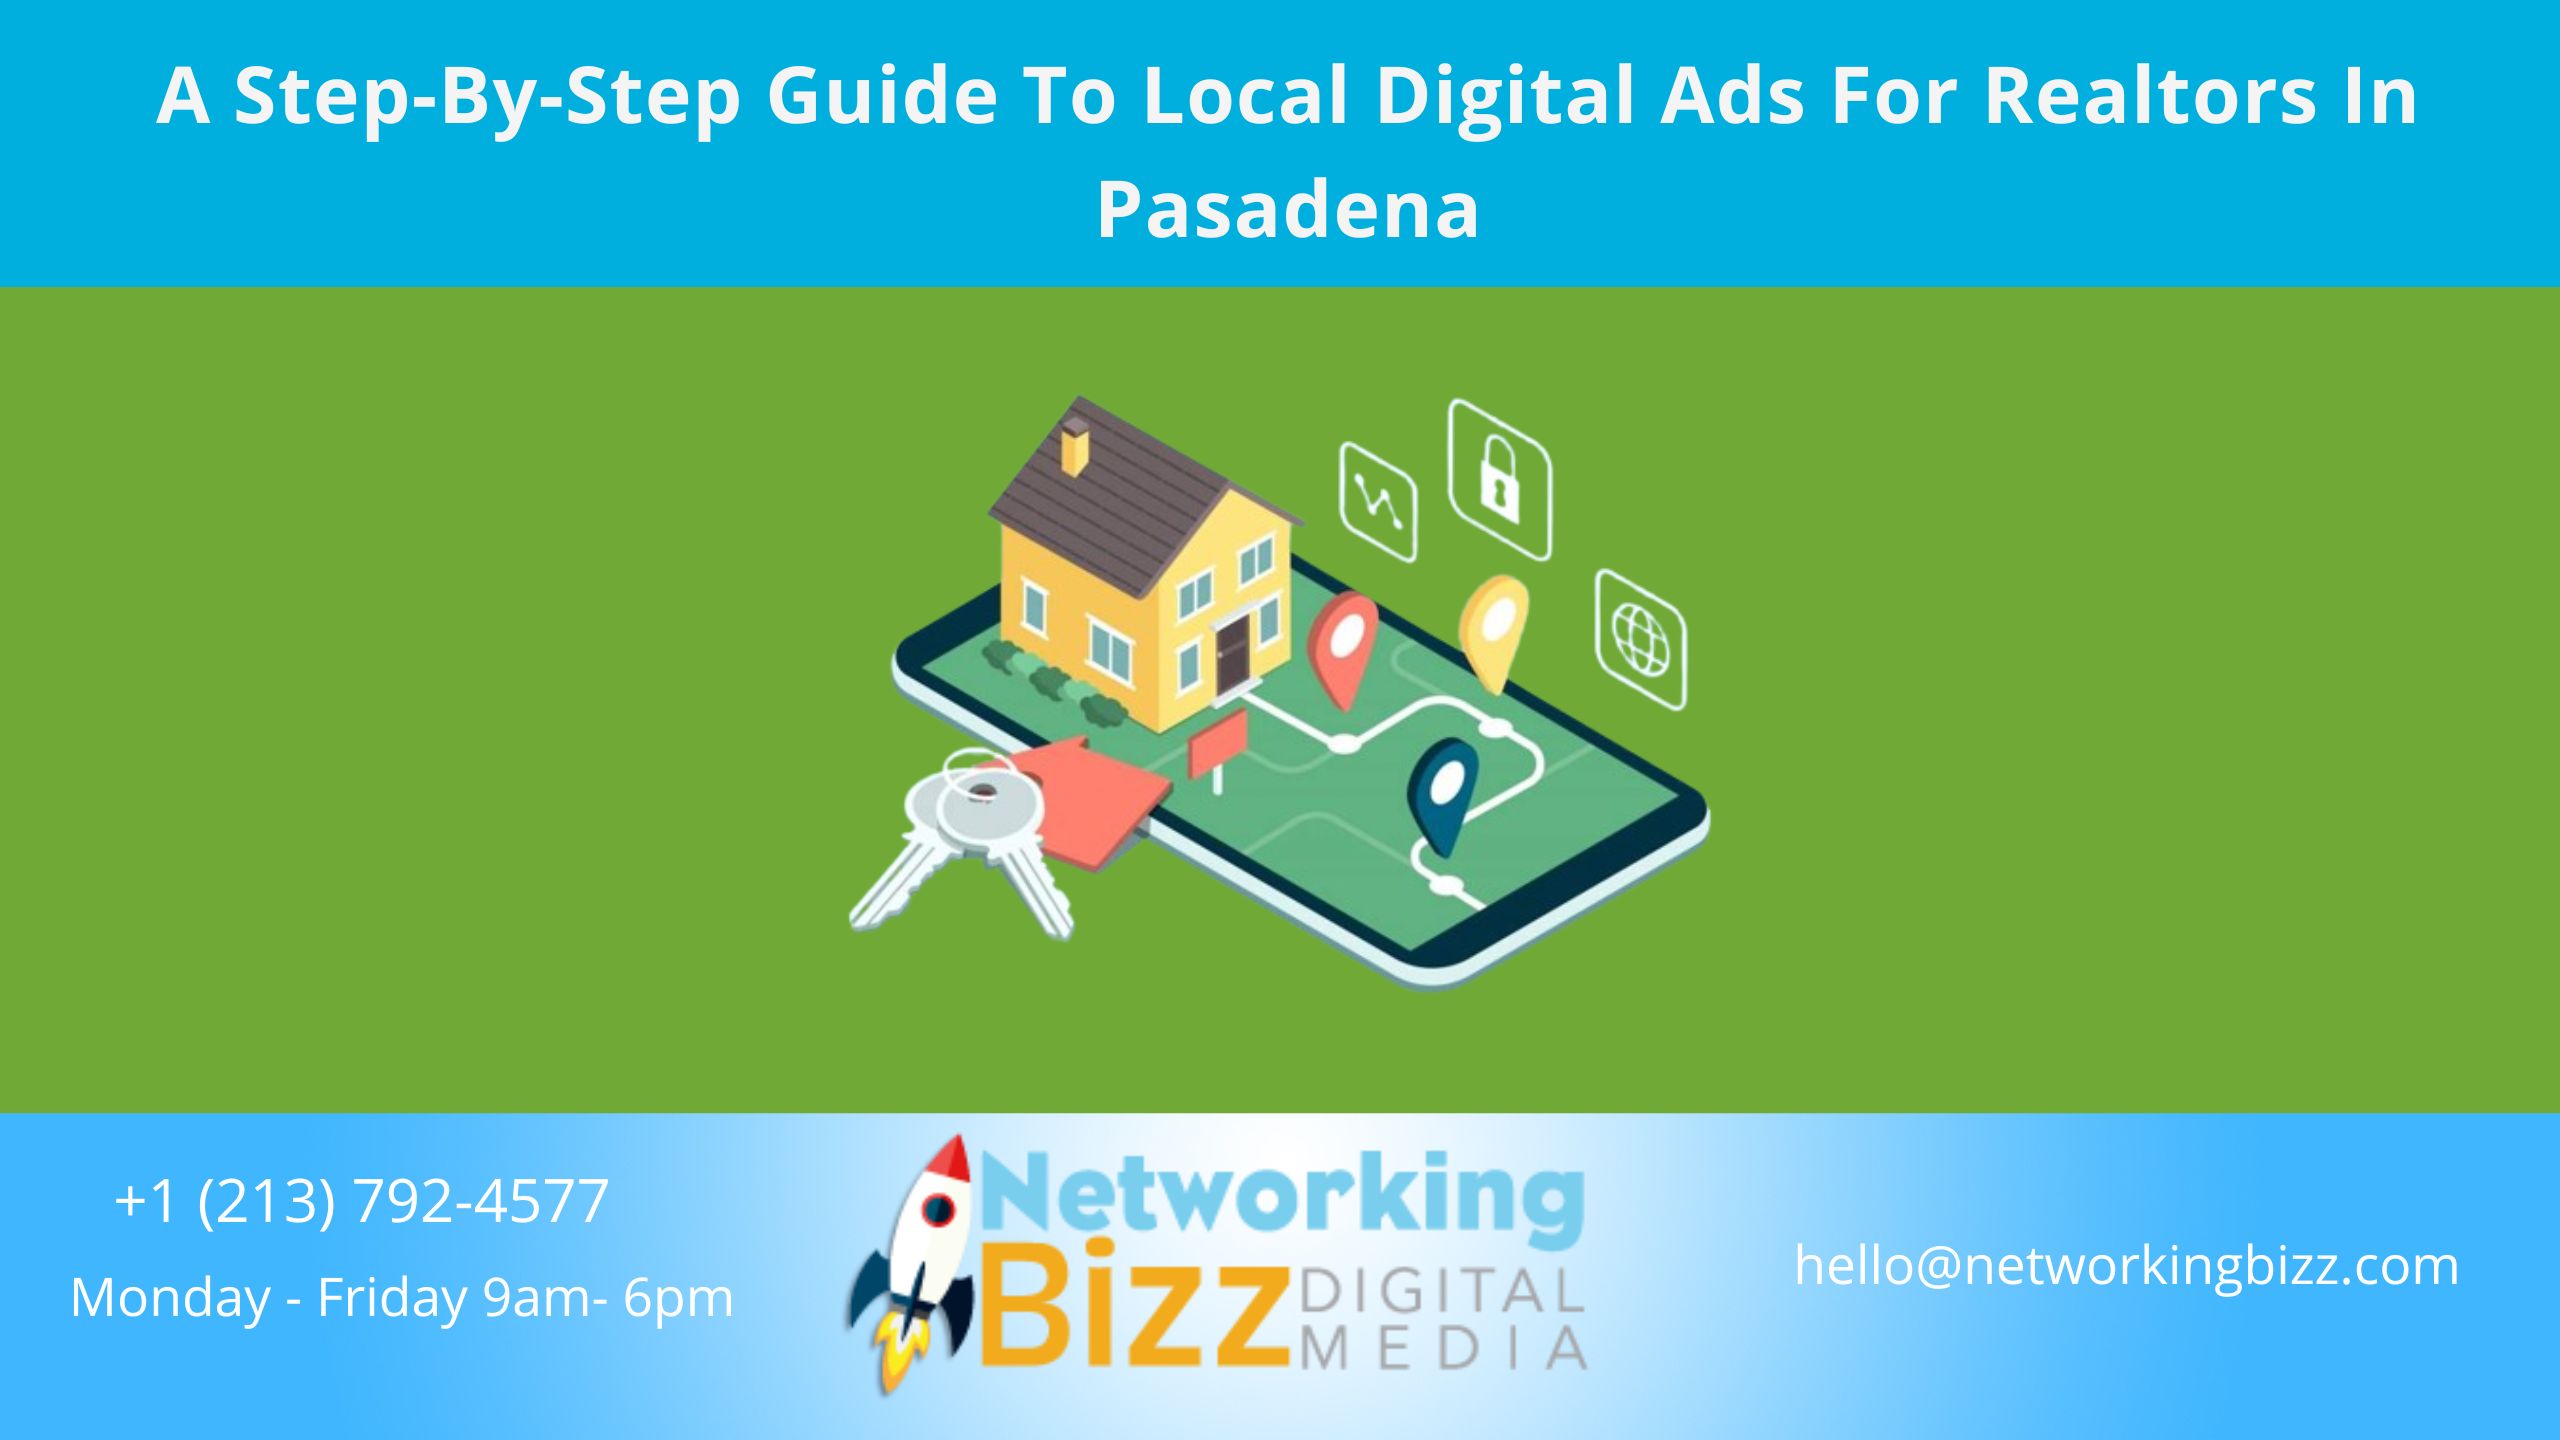 A Step-By-Step Guide To Local Digital Ads For Realtors In Pasadena